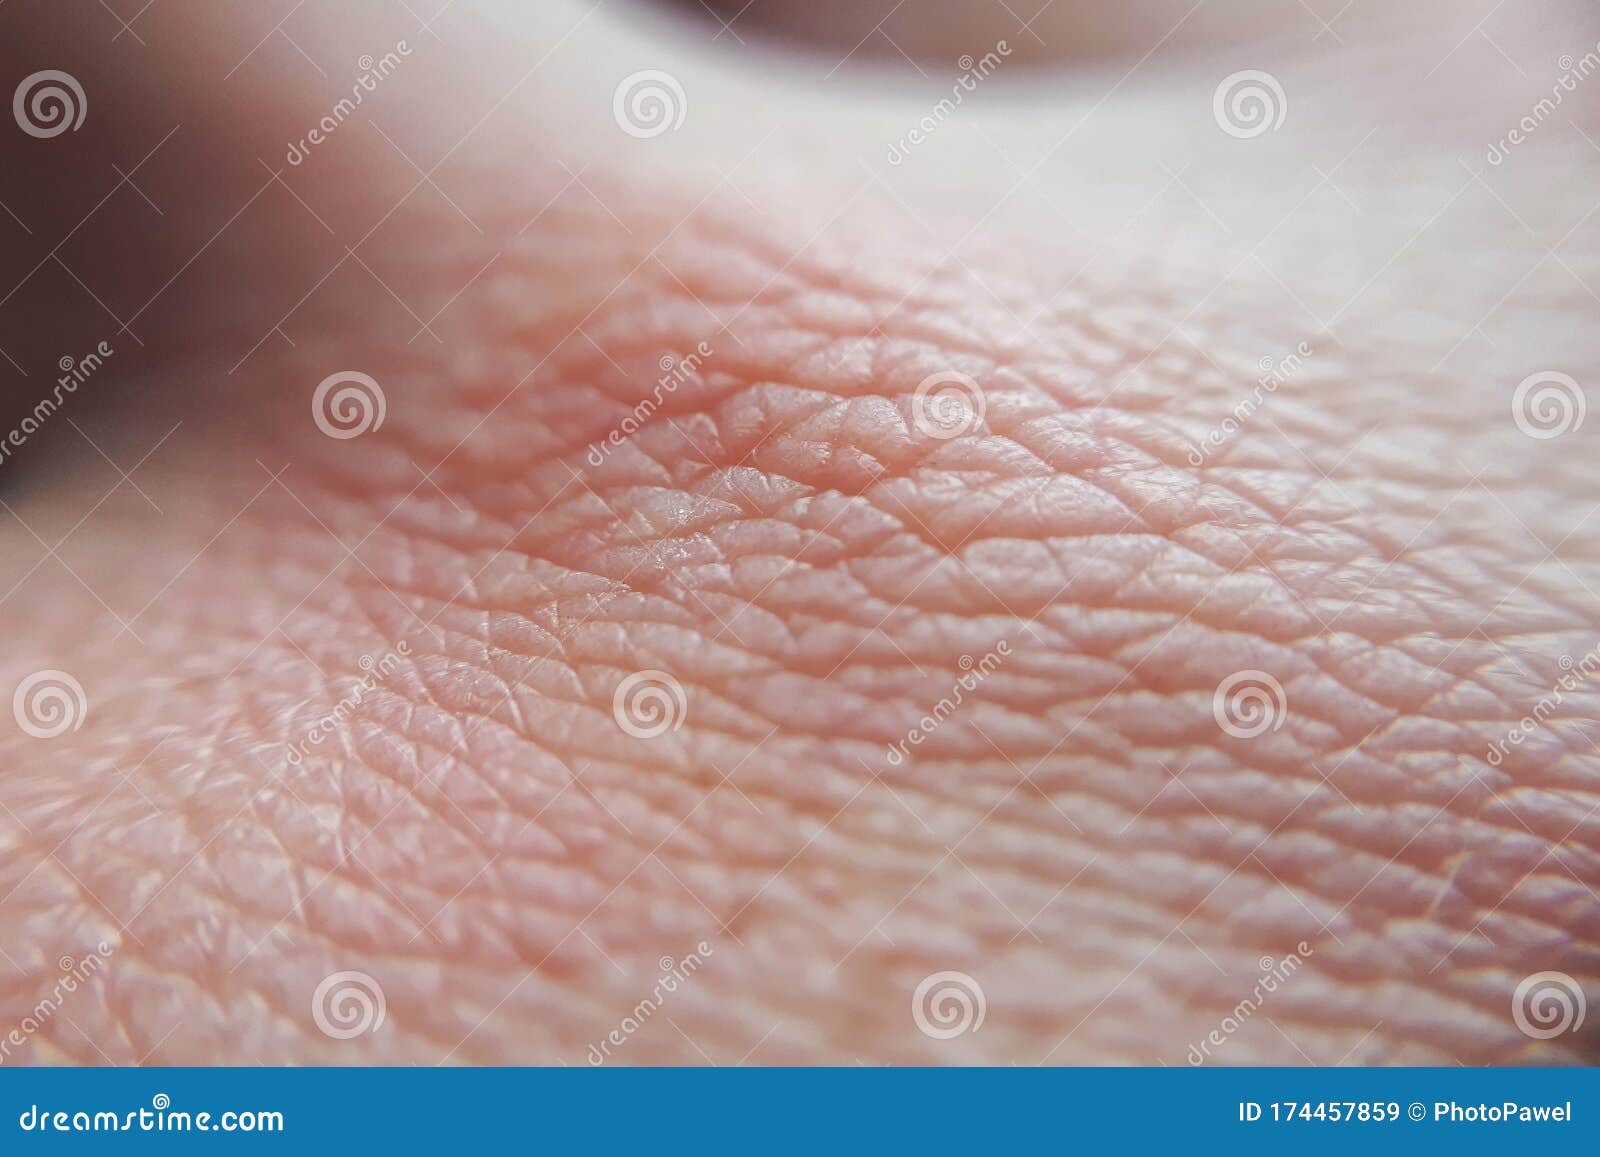 Macro Human Skin Close Up Background Stock Image Image Of Clean